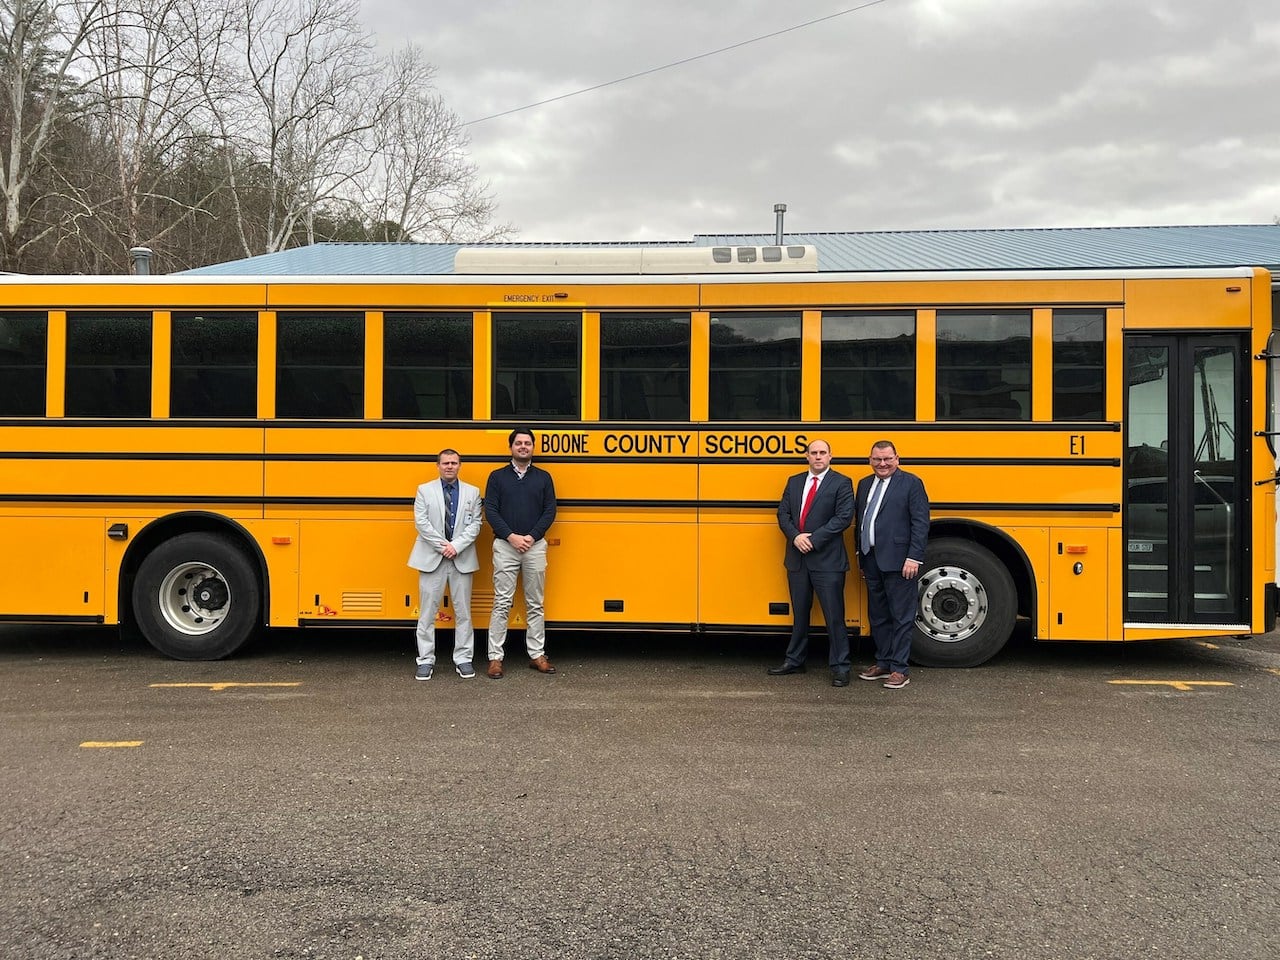 GreenPower Launches Round 3 of All-Electric School Bus Pilot Project in Four New School Districts in West Virginia